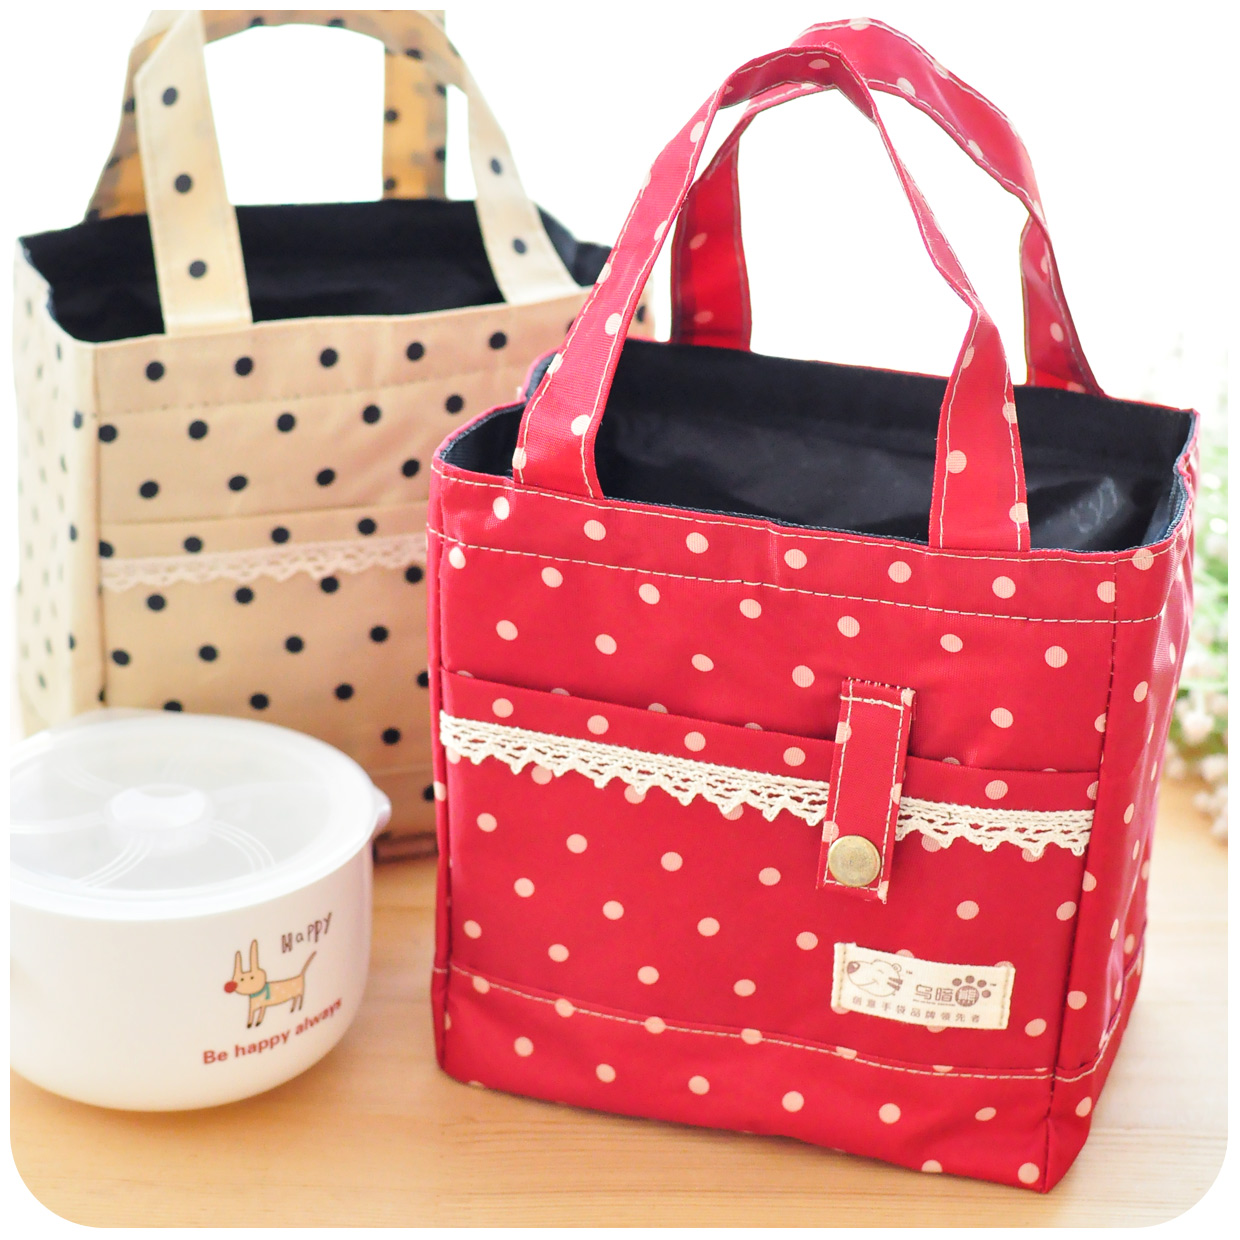 ... Lunch Bags for Kids Picnic Bags Thermo Bags Totes(China (Mainland